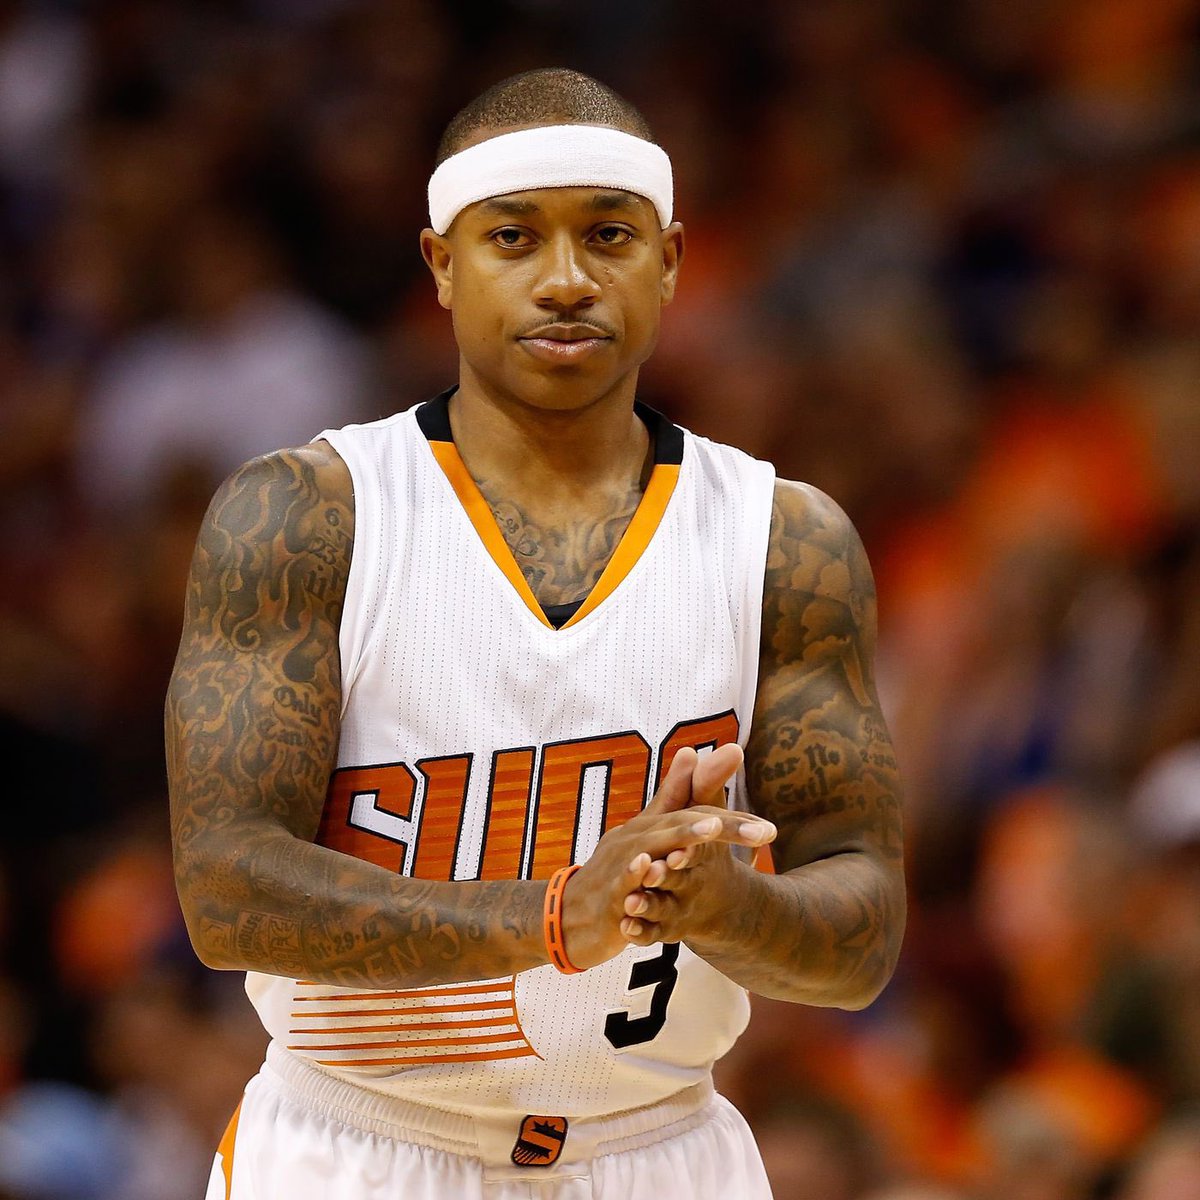 BREAKING: Isaiah Thomas requested a trade from Suns, per @ChrisBHaynes